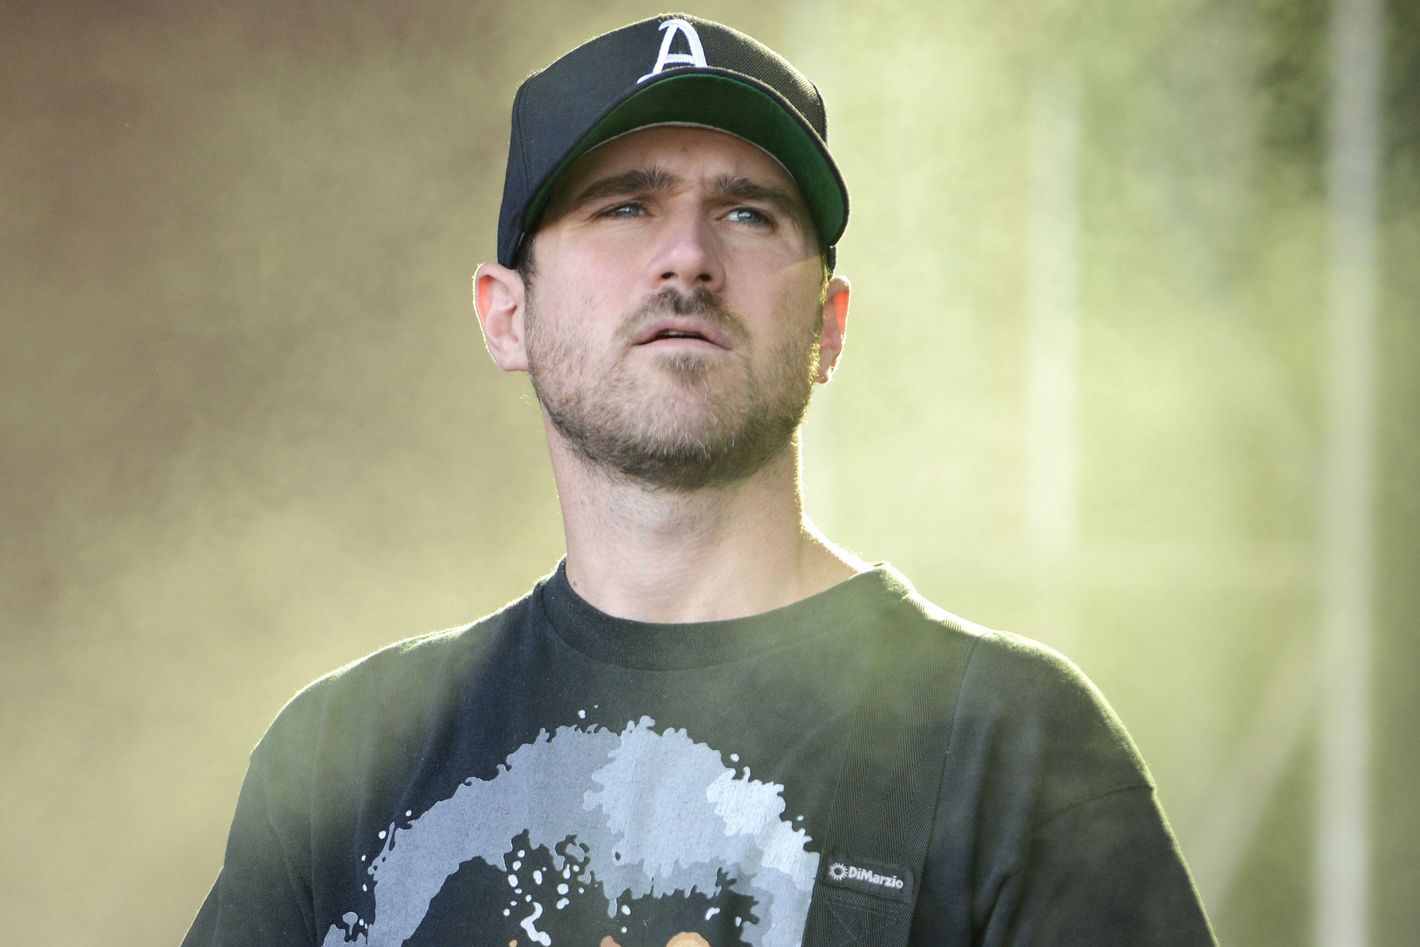 Jesse Lacey appreciation post. I love him and just want the